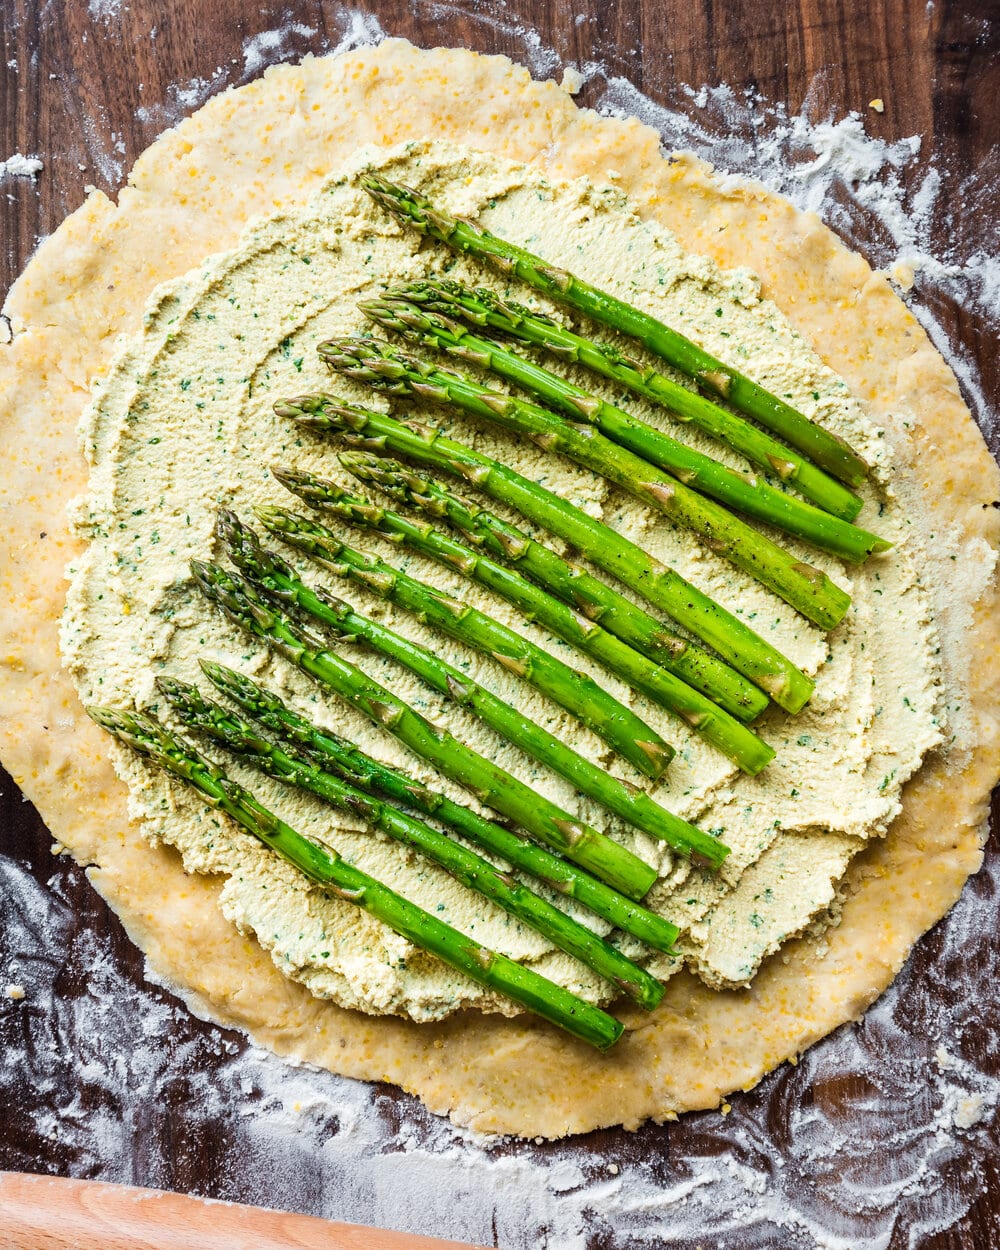 Tofu ricotta and asparagus on galette dough on a wooden cutting board.